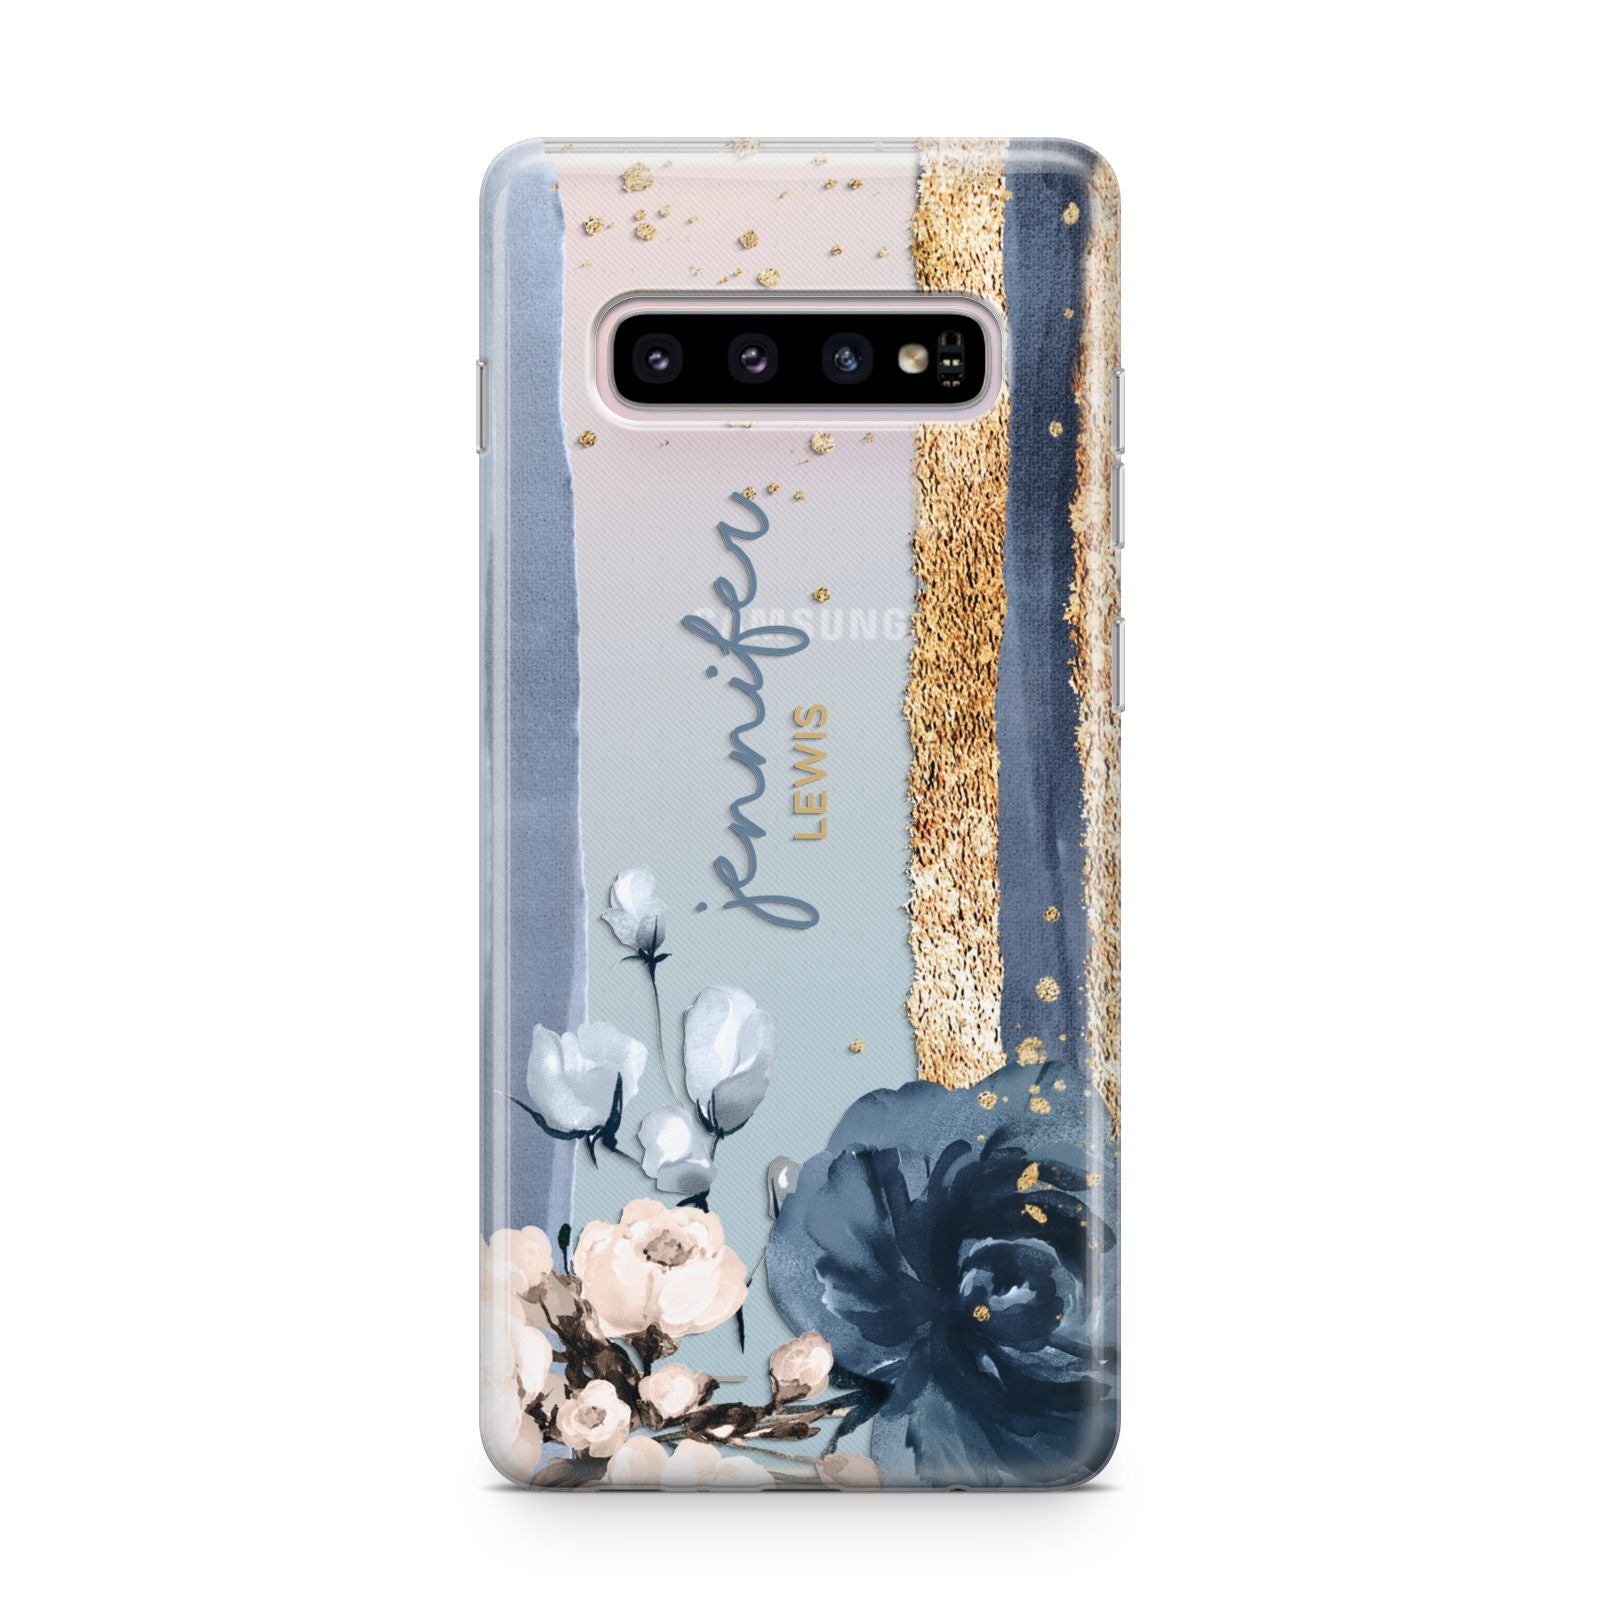 Personalised Blue Gold Name Samsung Galaxy S10 Plus Case